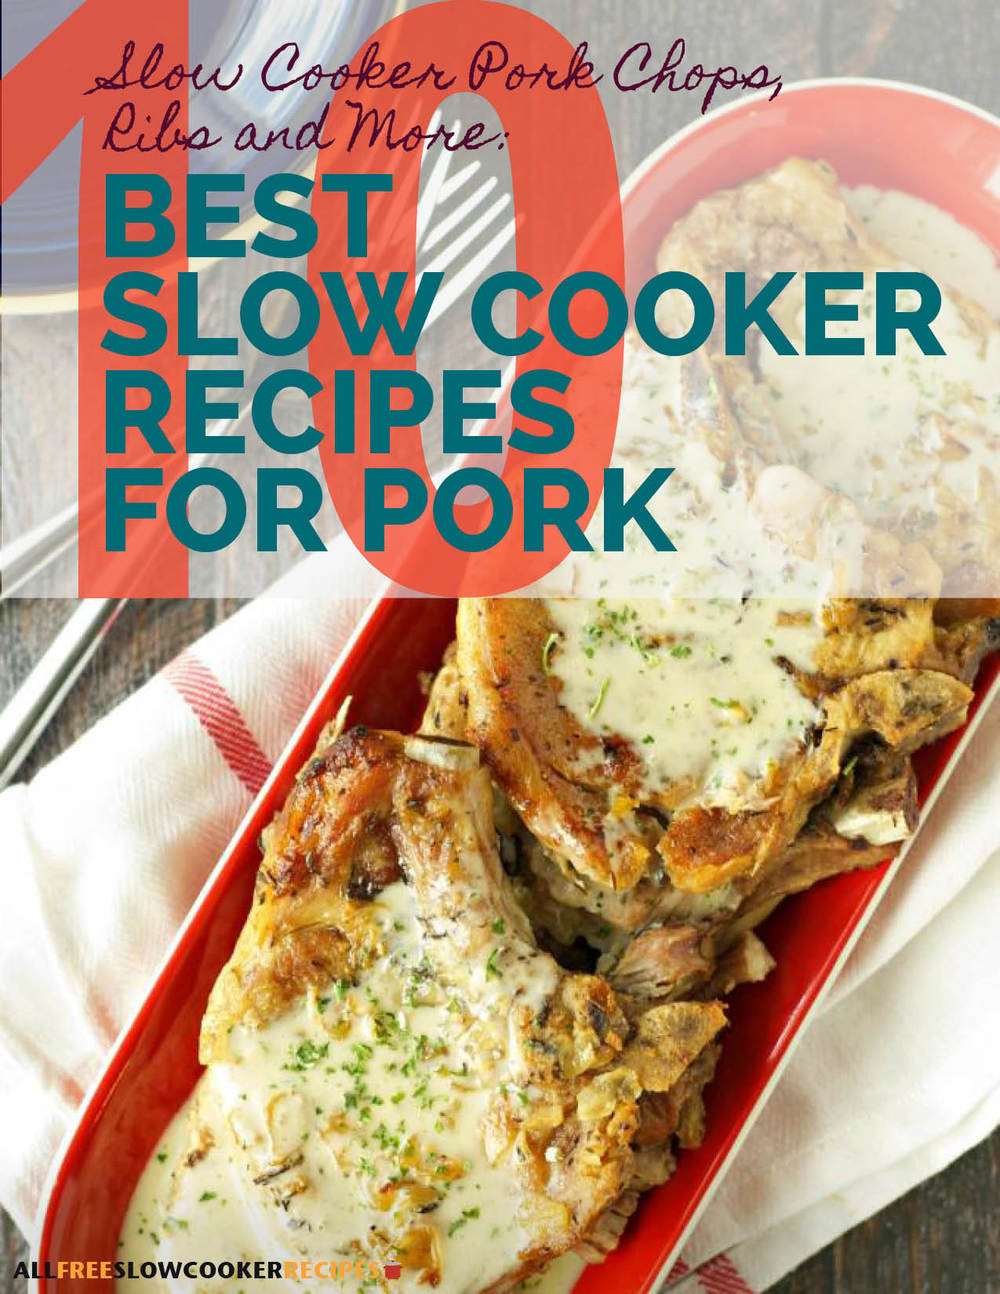 Slow Cooker Pork Chops, Ribs and More: 10 Best Slow Cooker Recipes for ...